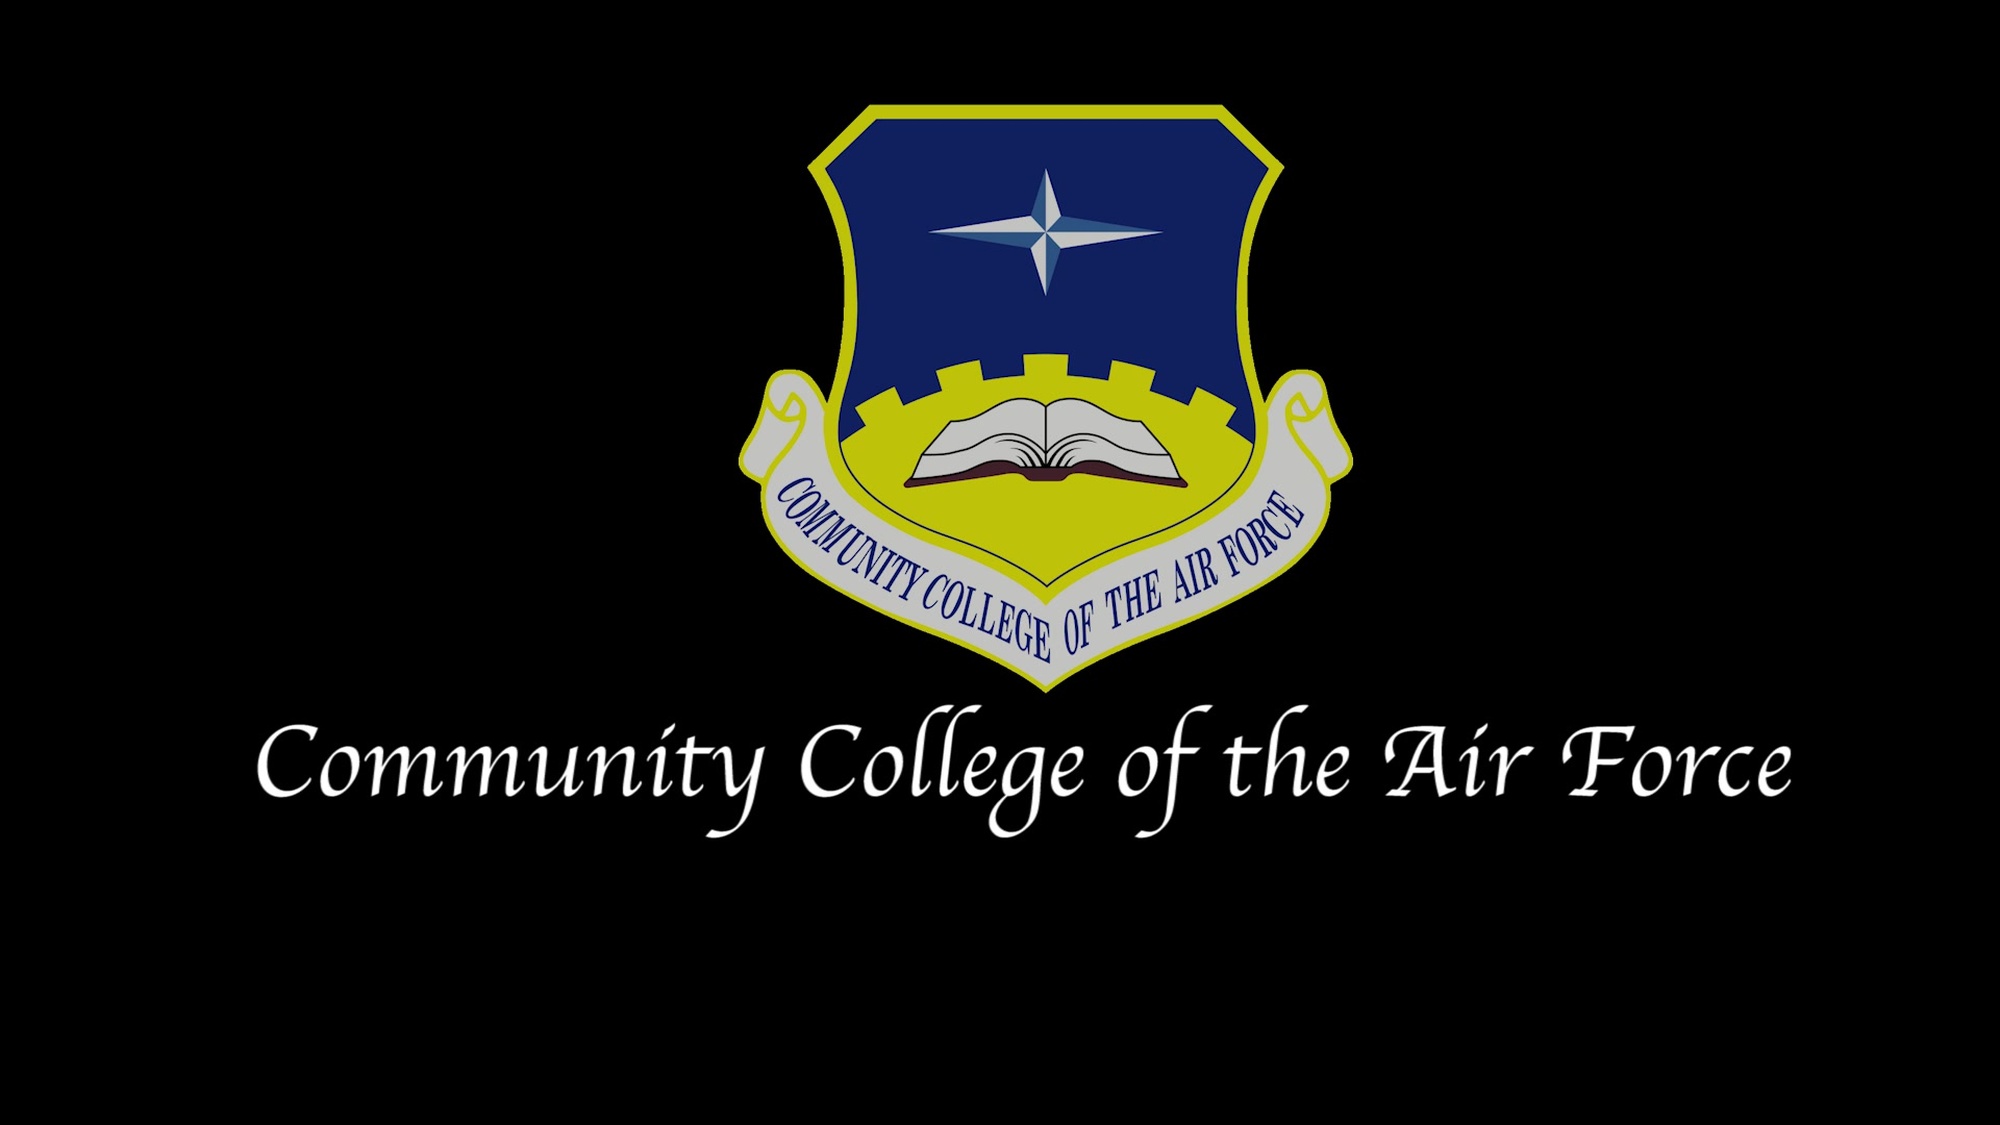 The Community College of the Air Force is a federally-chartered academic institution that serves the United States Air Force's enlisted total force. We partner with 112 affiliated Air Force schools and 300 Education Service Offices located worldwide to serve approximately 270,000 active, guard, and reserve enlisted personnel, making CCAF the world's largest community college system. The college annually awards over 22,000 associate in applied science degrees from 71 degree programs. 

We strive to meet the demands of the Air Force's expeditionary environment and at the same time help airmen achieve their educational goals by capitalizing on job-related training and education as part of flexible degree completion programs.

Within our website you'll find information about our degree programs, our certification and licensure programs, and our regional accreditation. So whether you're a prospective or current student, an education counselor, a recruiter, or a commander, we've designed this website to provide valuable information about higher education opportunities with CCAF.

https://www.airuniversity.af.edu/Barnes/CCAF/